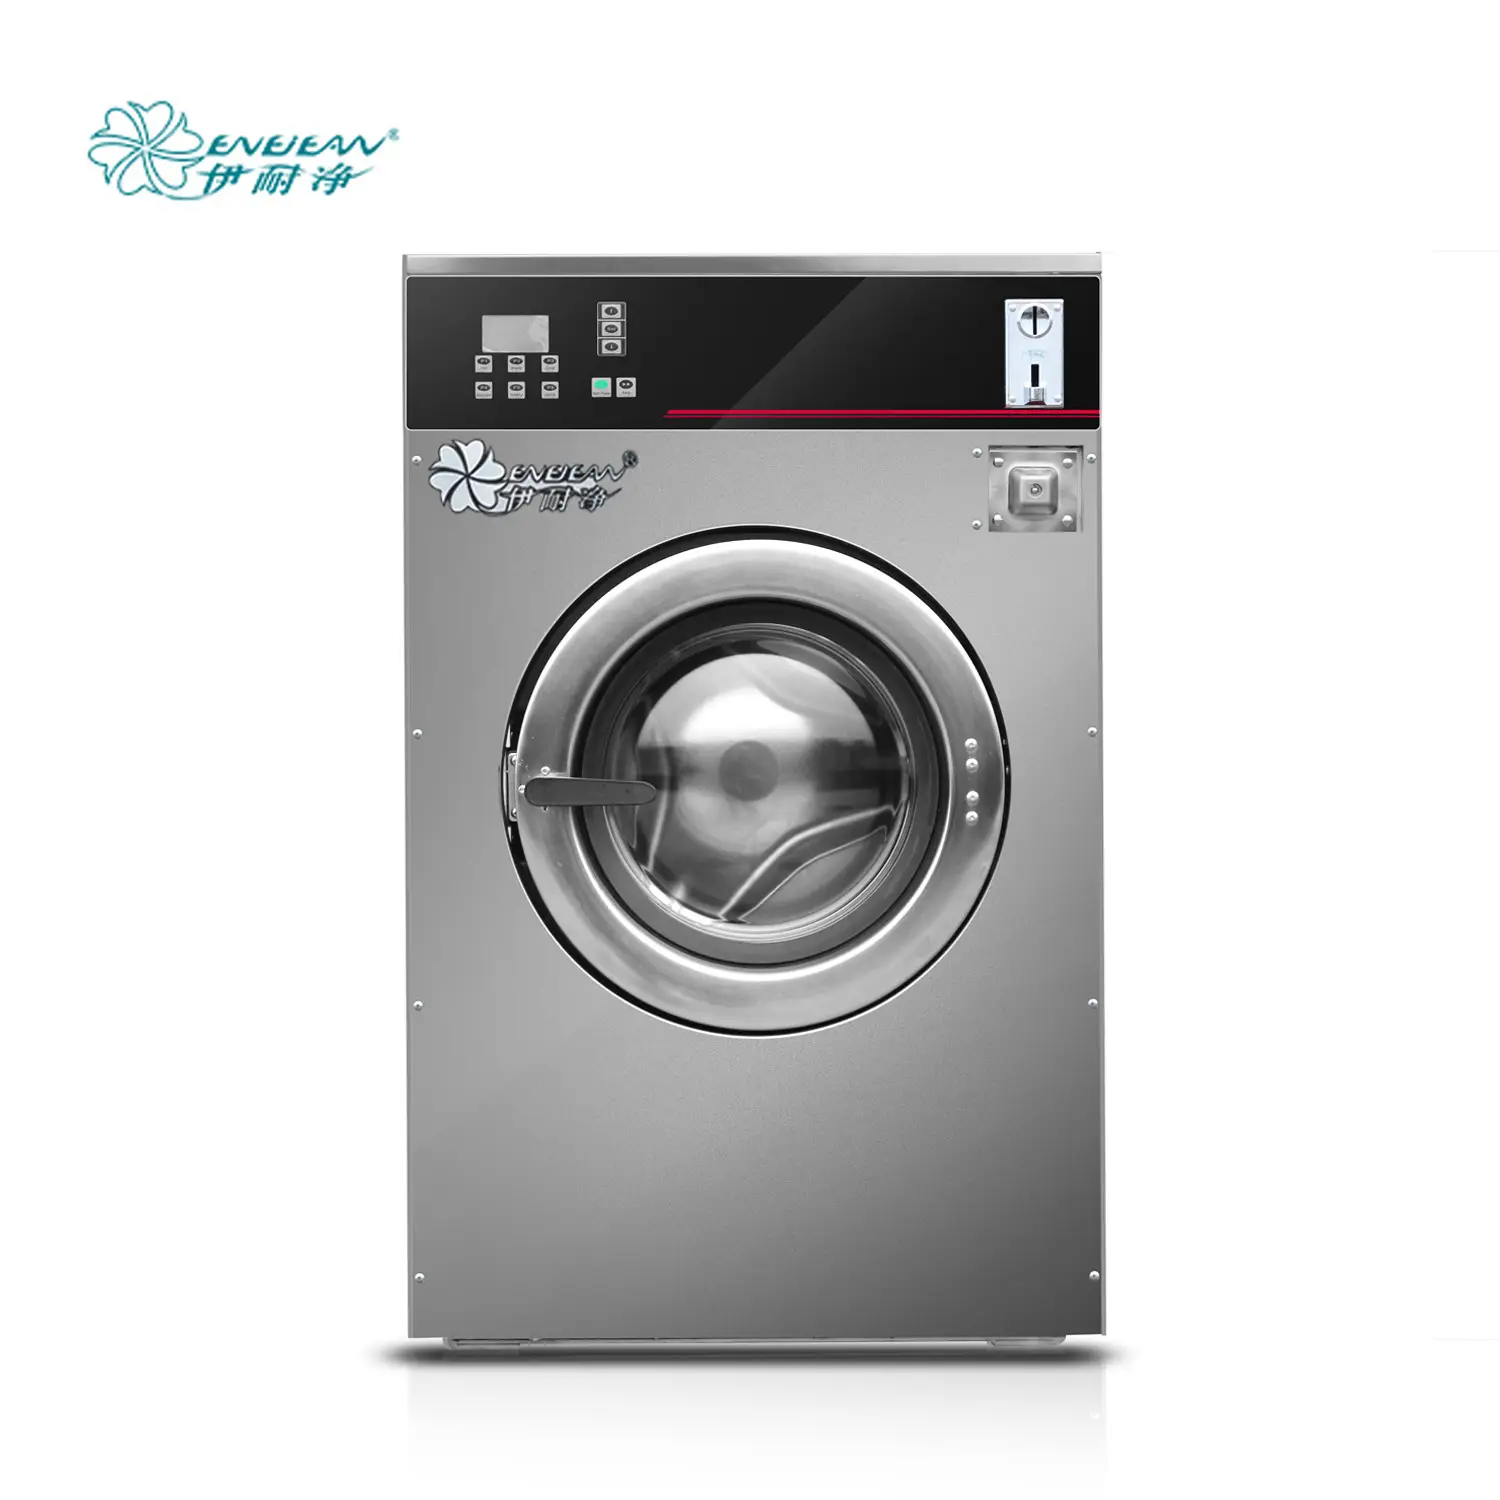 YSX-22 Fixed Type Hard Mounted Coin Operated Washing Machine